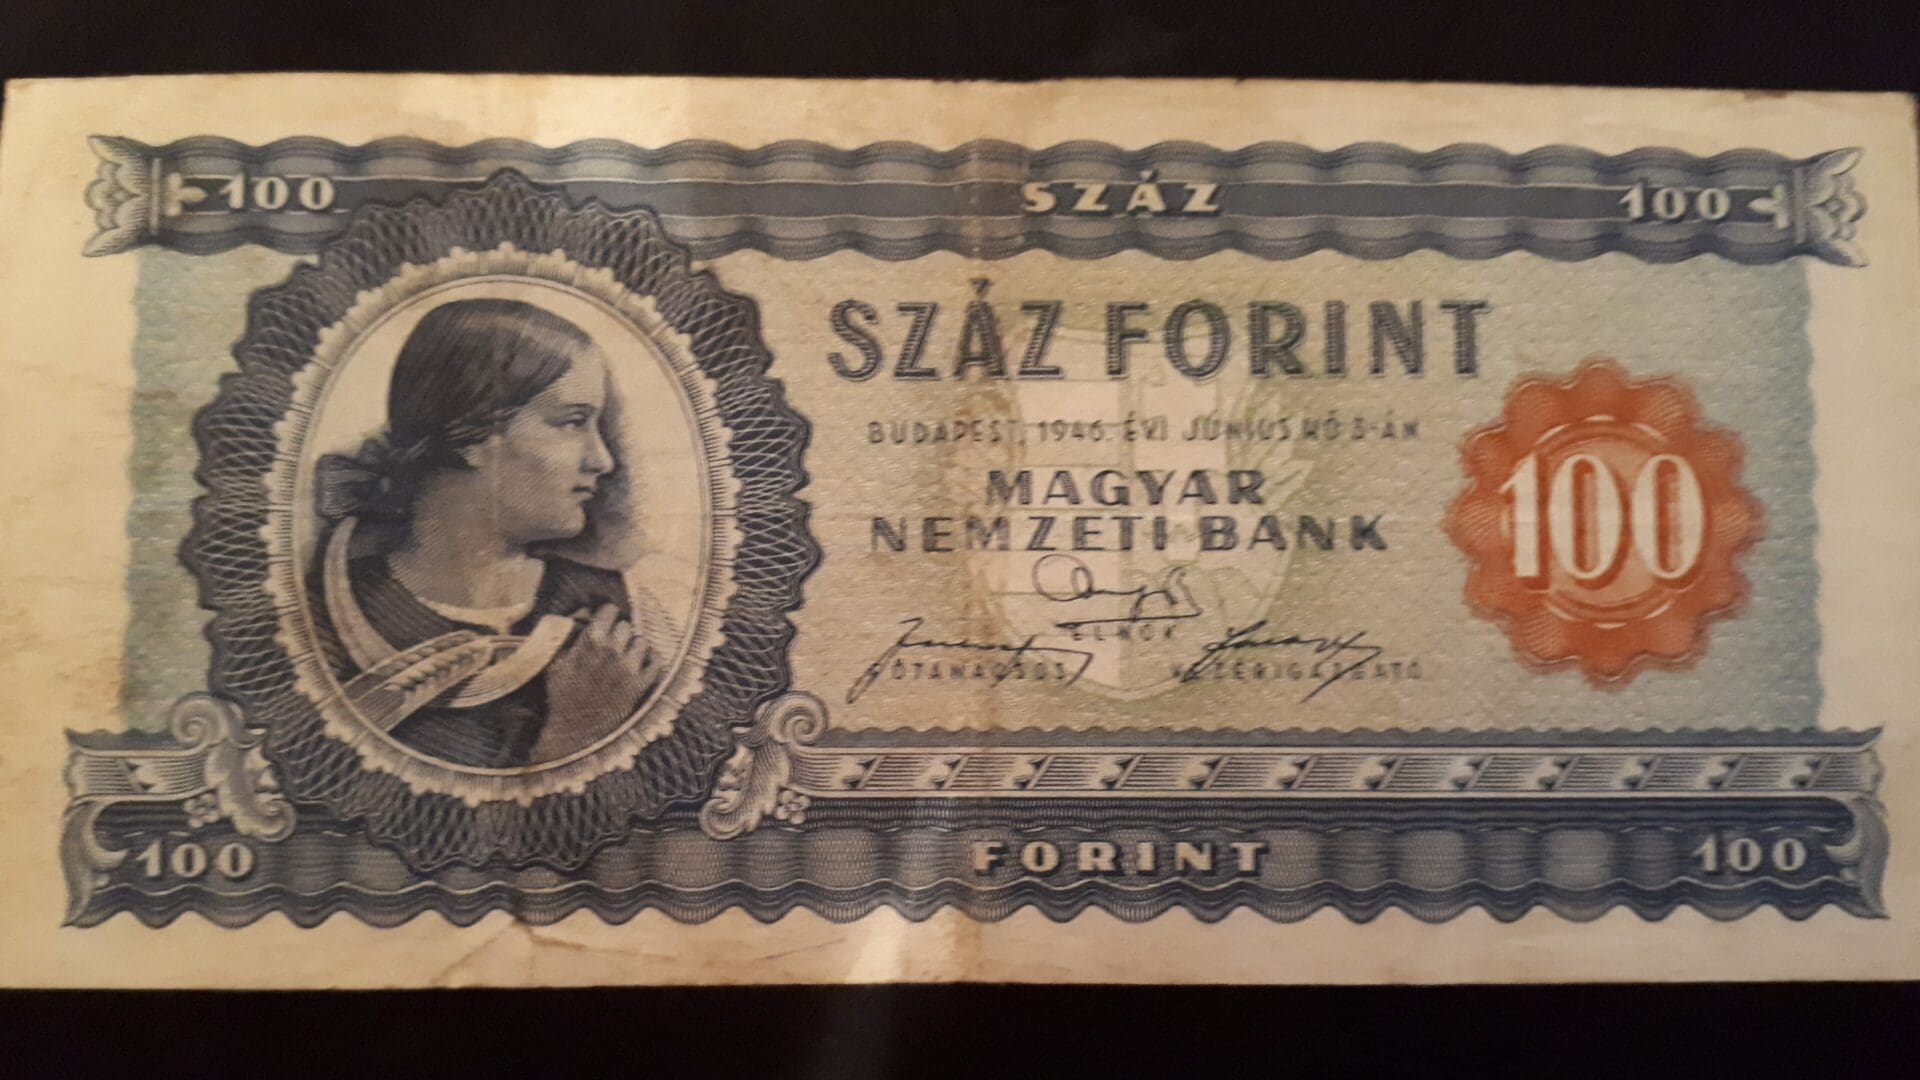 A one hundred forint banknote from 1946.